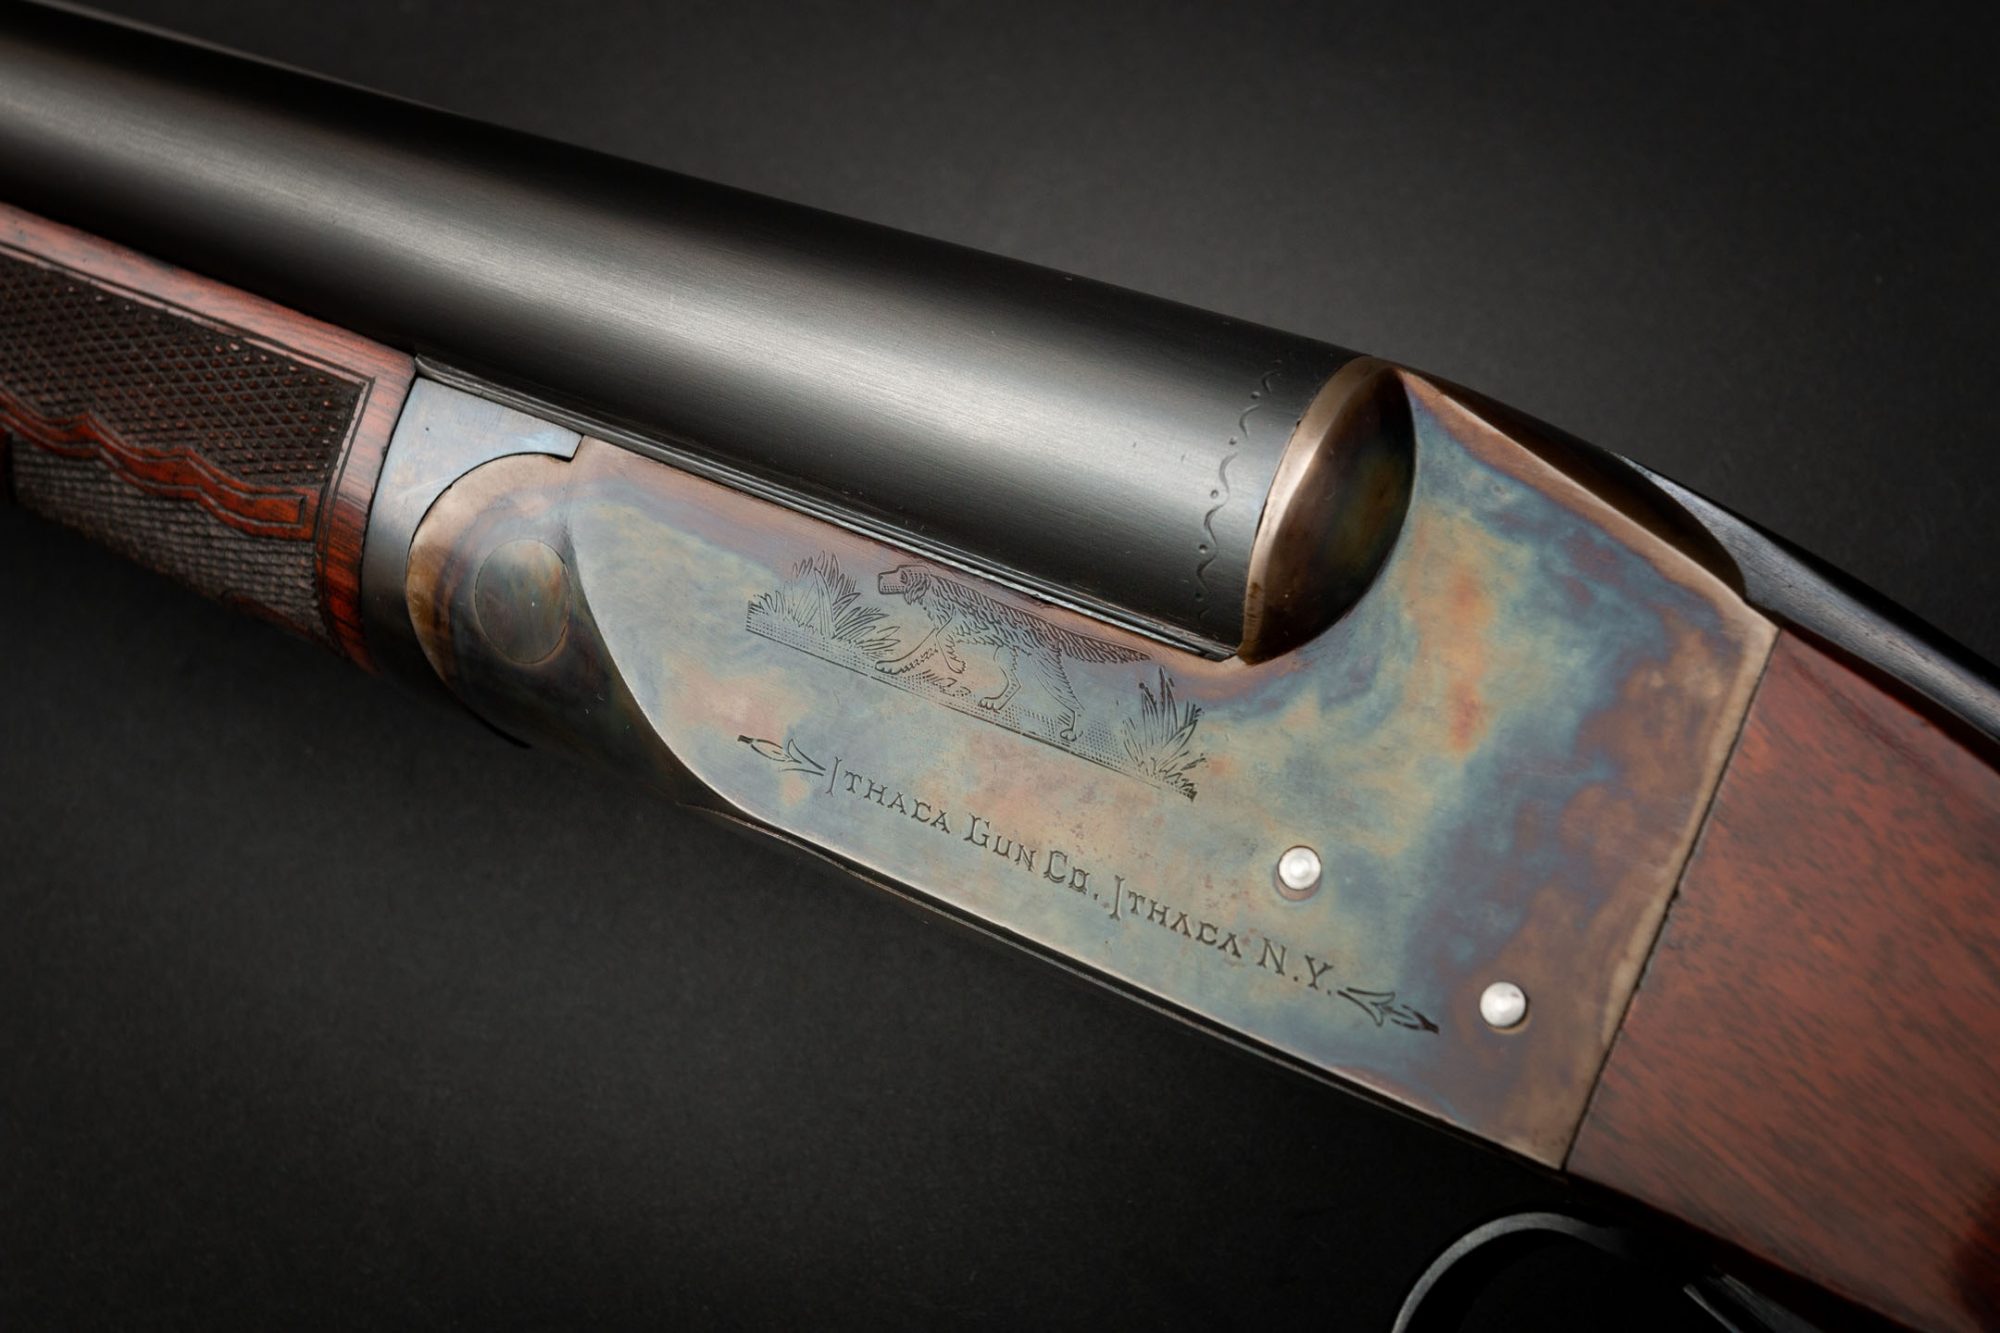 Ithaca Flues 20 gauge shotgun with case colors by Turnbull Restoration Co., all other work by third party, for sale by Turnbull Restoration Co.